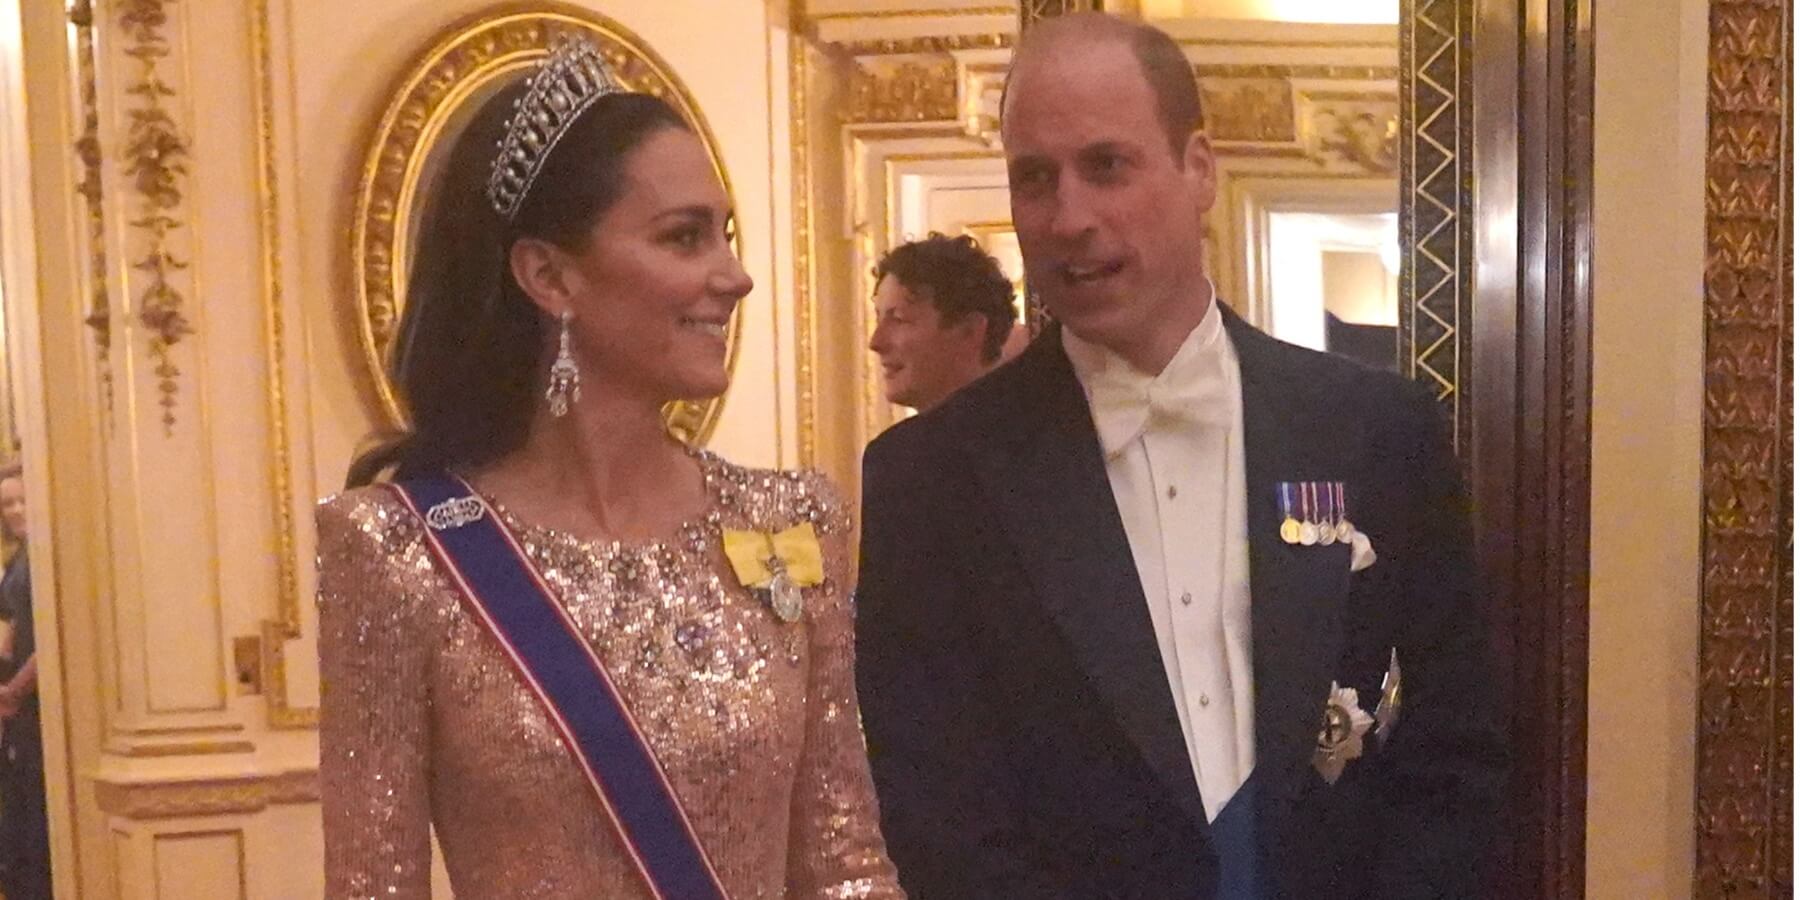 Prince William, Prince of Wales and Catherine, Princess of Wales at an evening reception for members of the Diplomatic Corps at Buckingham Palace on December 5, 2023 in London, England.